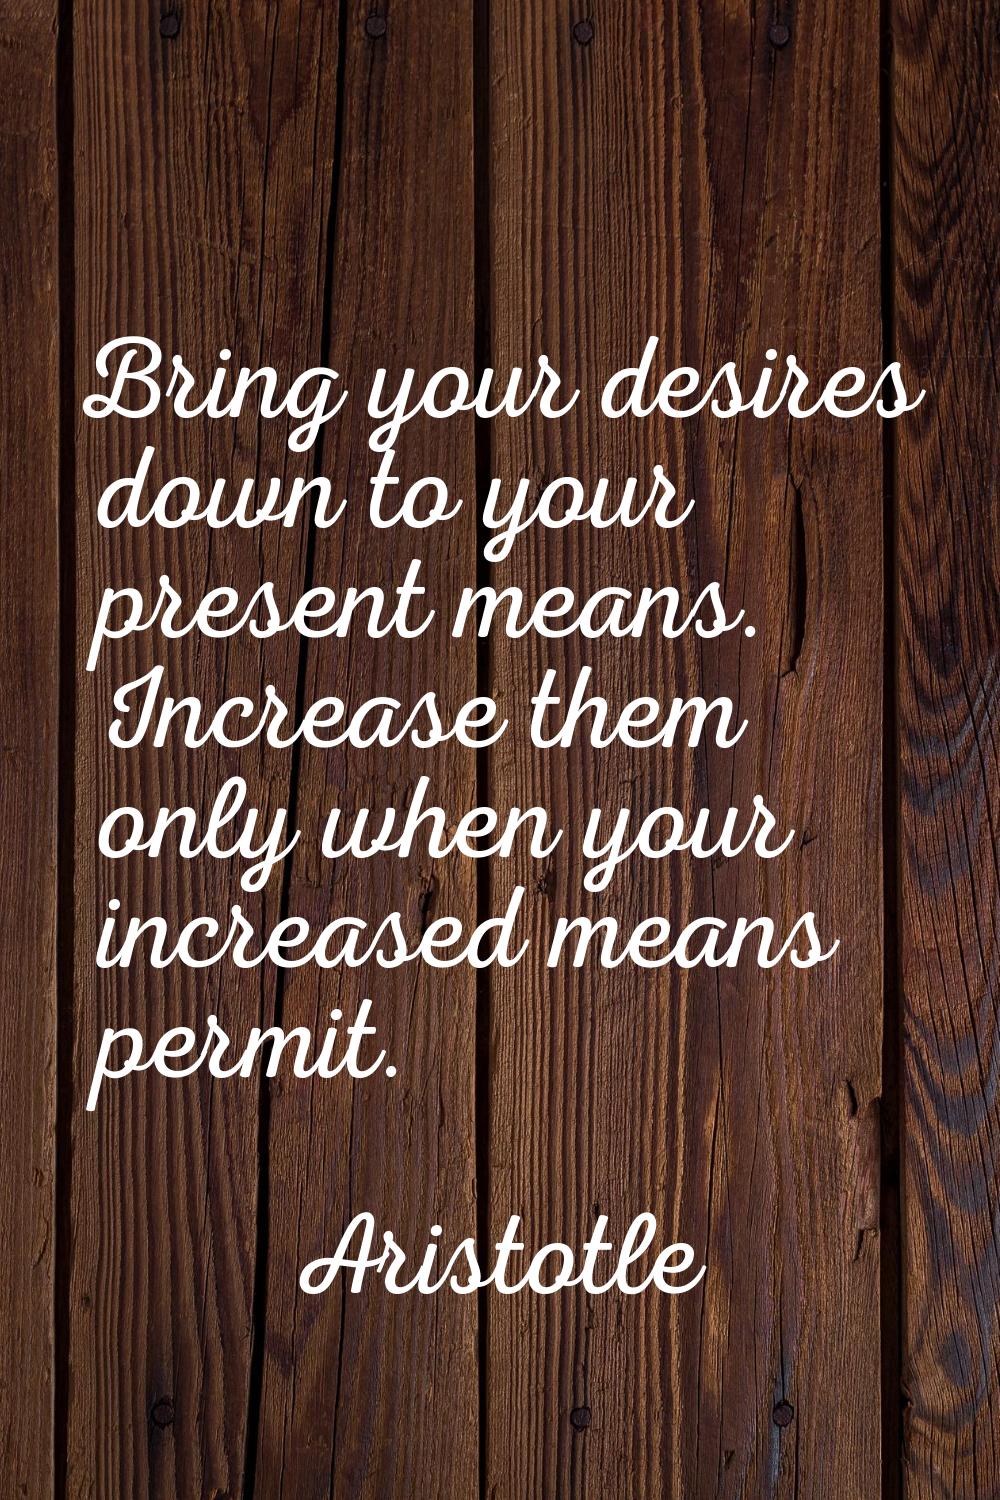 Bring your desires down to your present means. Increase them only when your increased means permit.